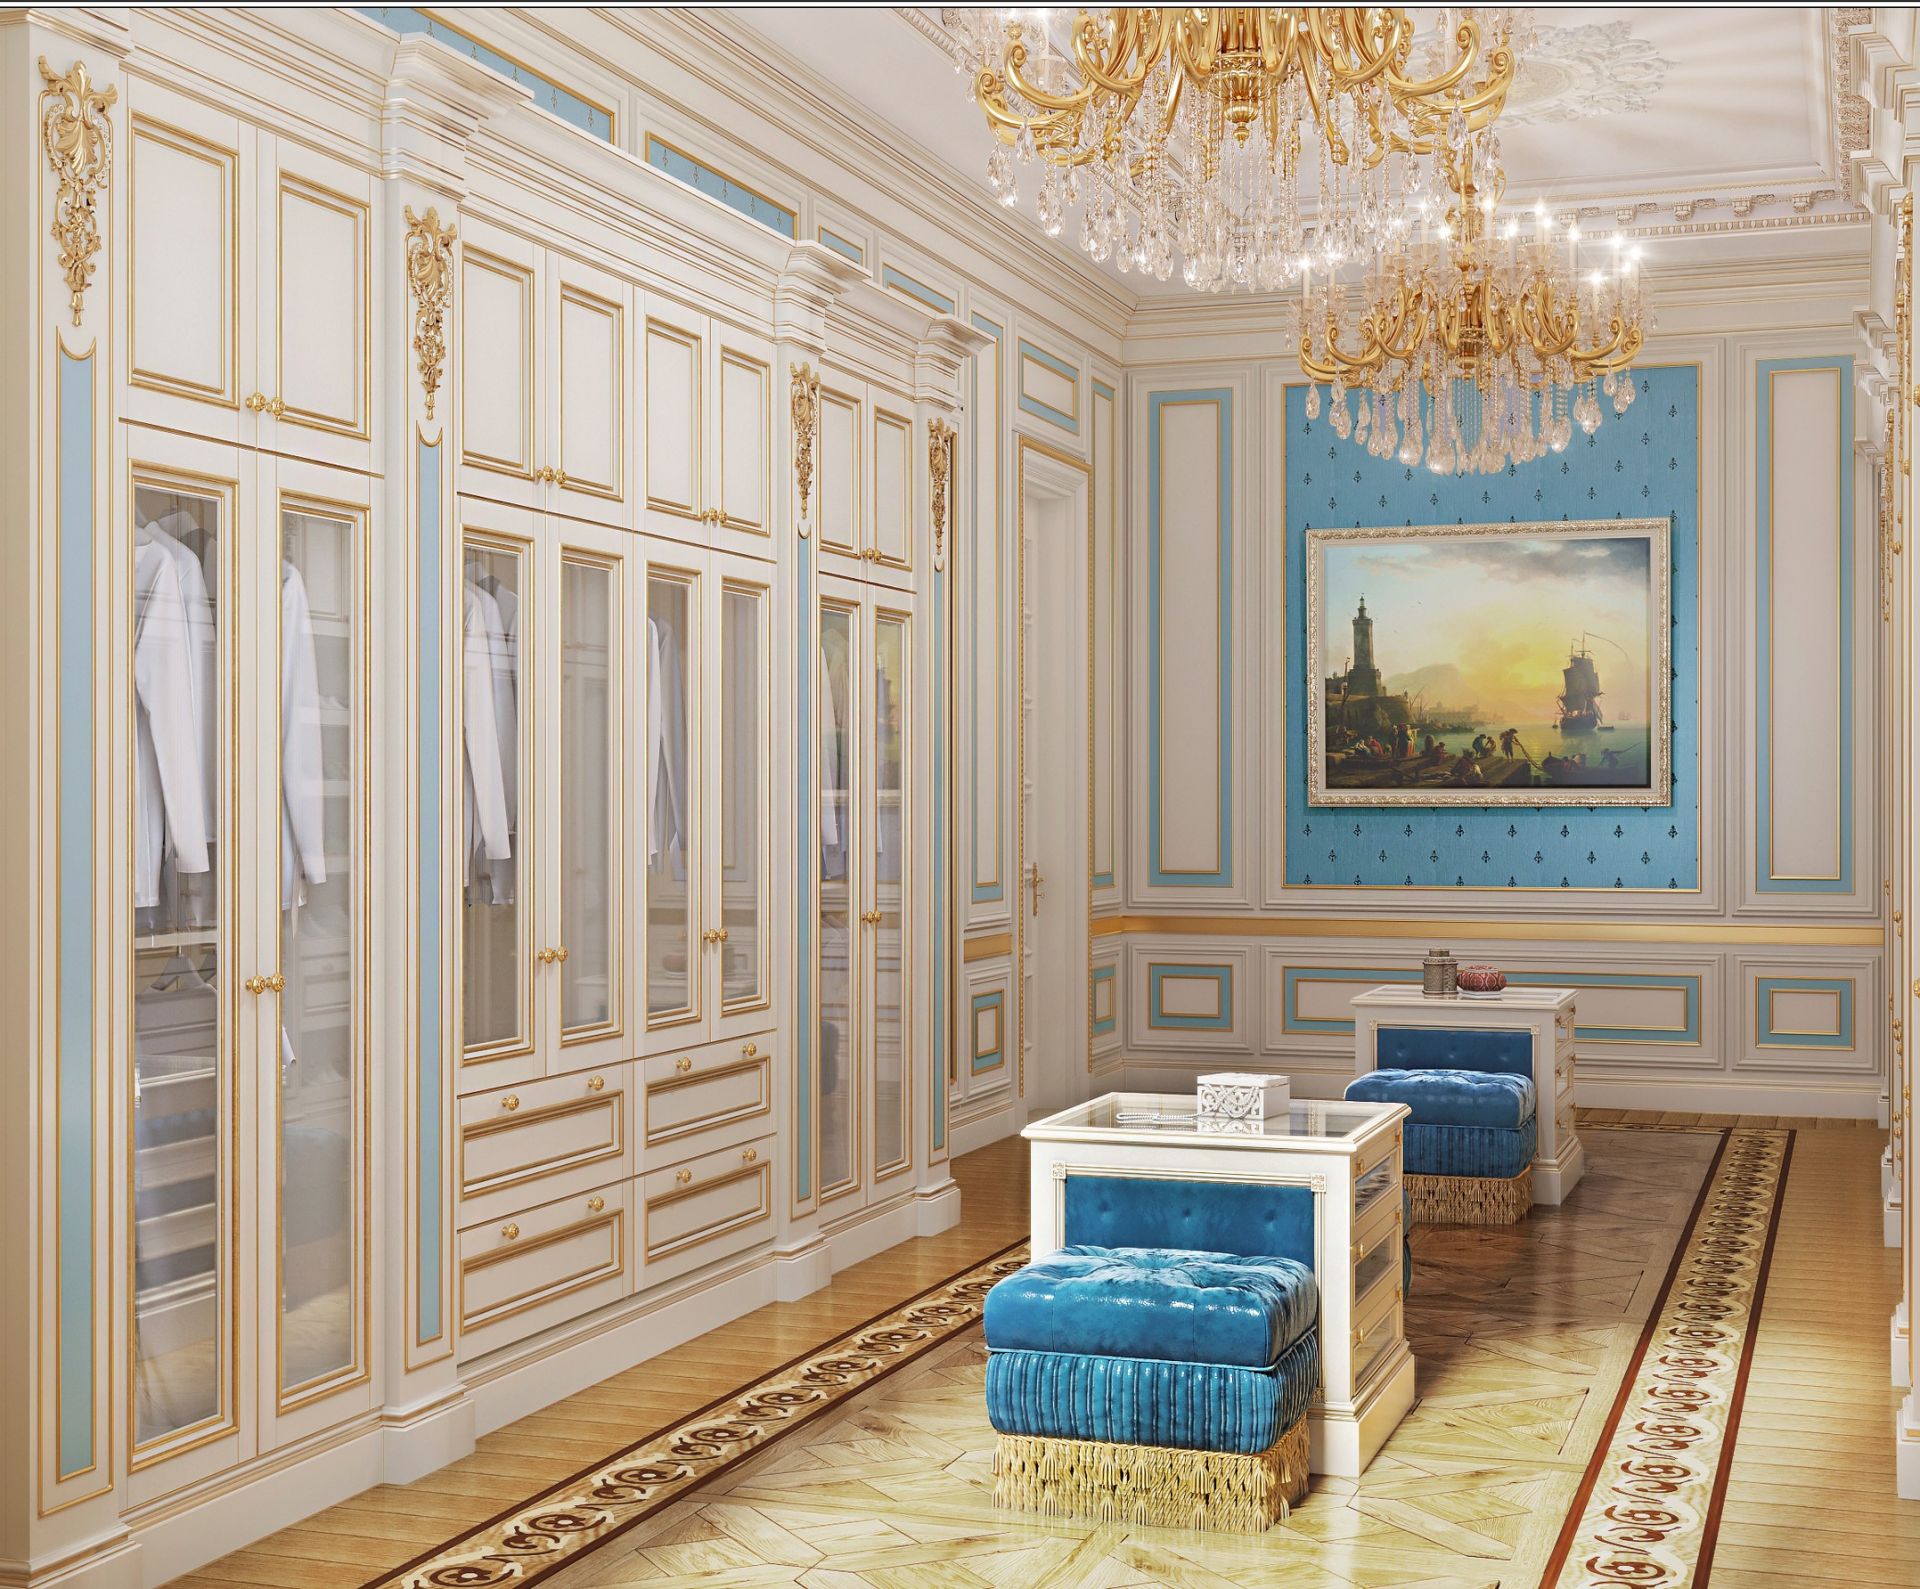 Palace-style dressing room